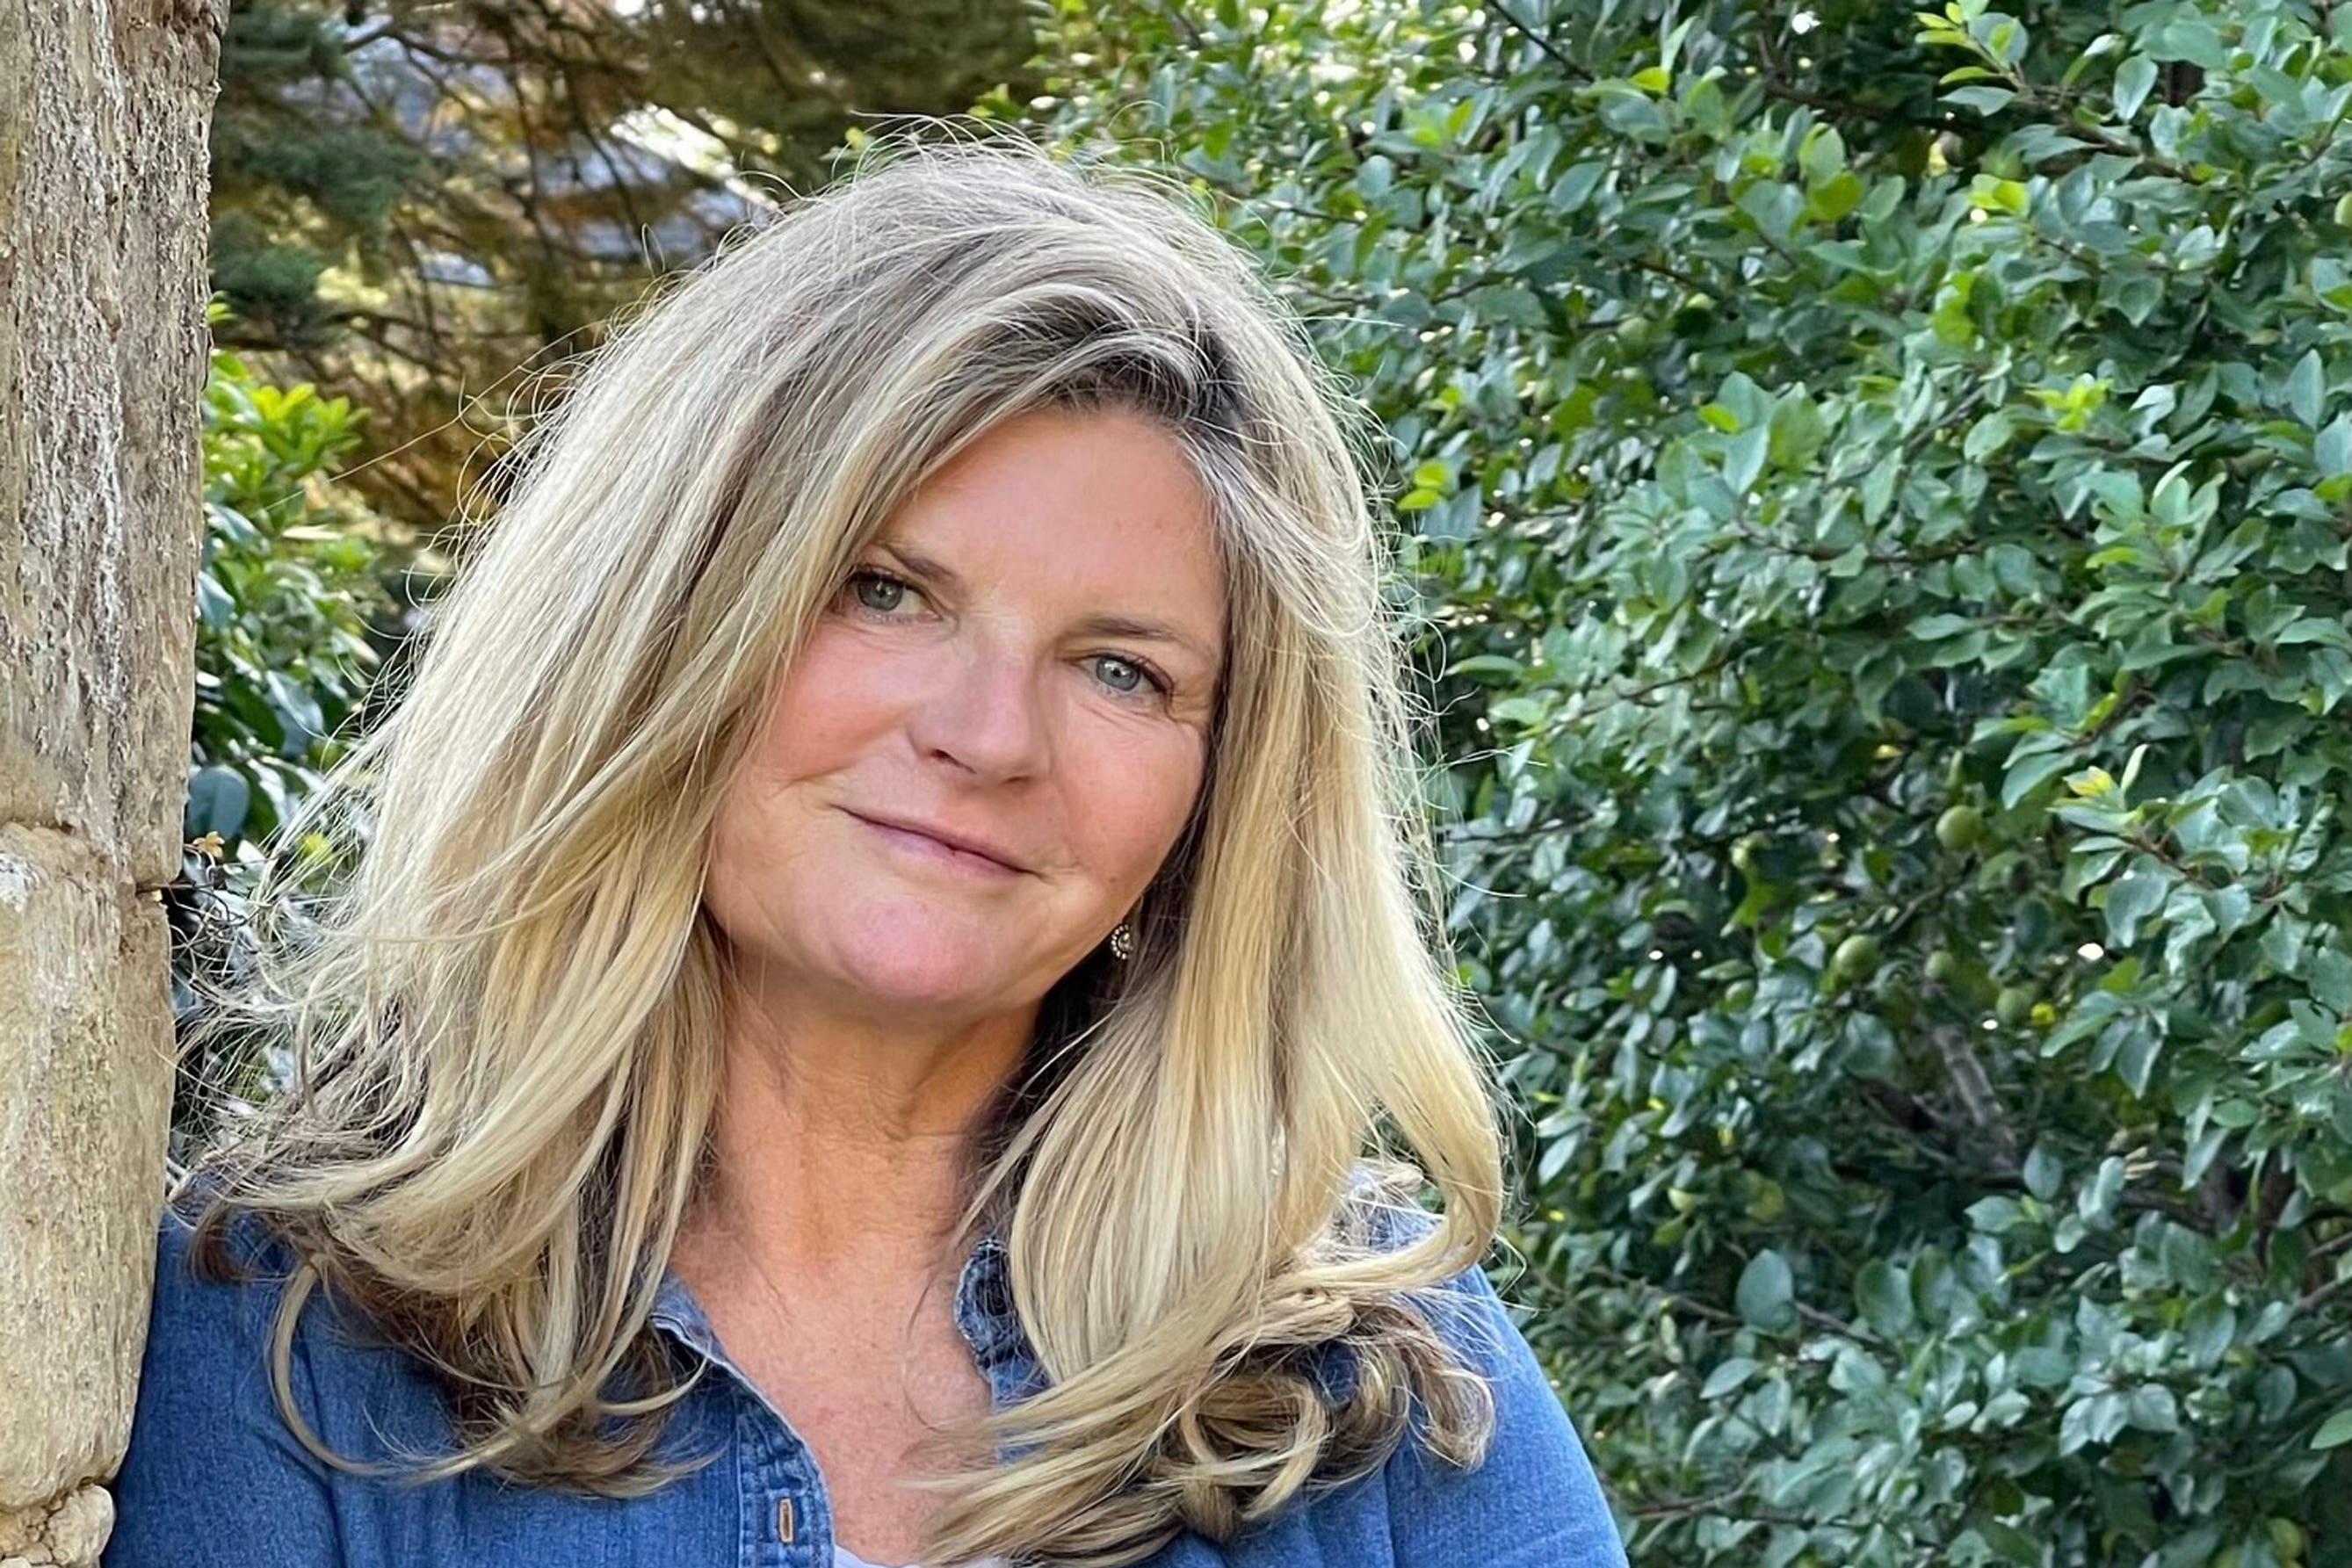 The highs and lows of Susannah Constantine’s life are laid bare in her memoir ‘Ready For Absolutely Nothing’